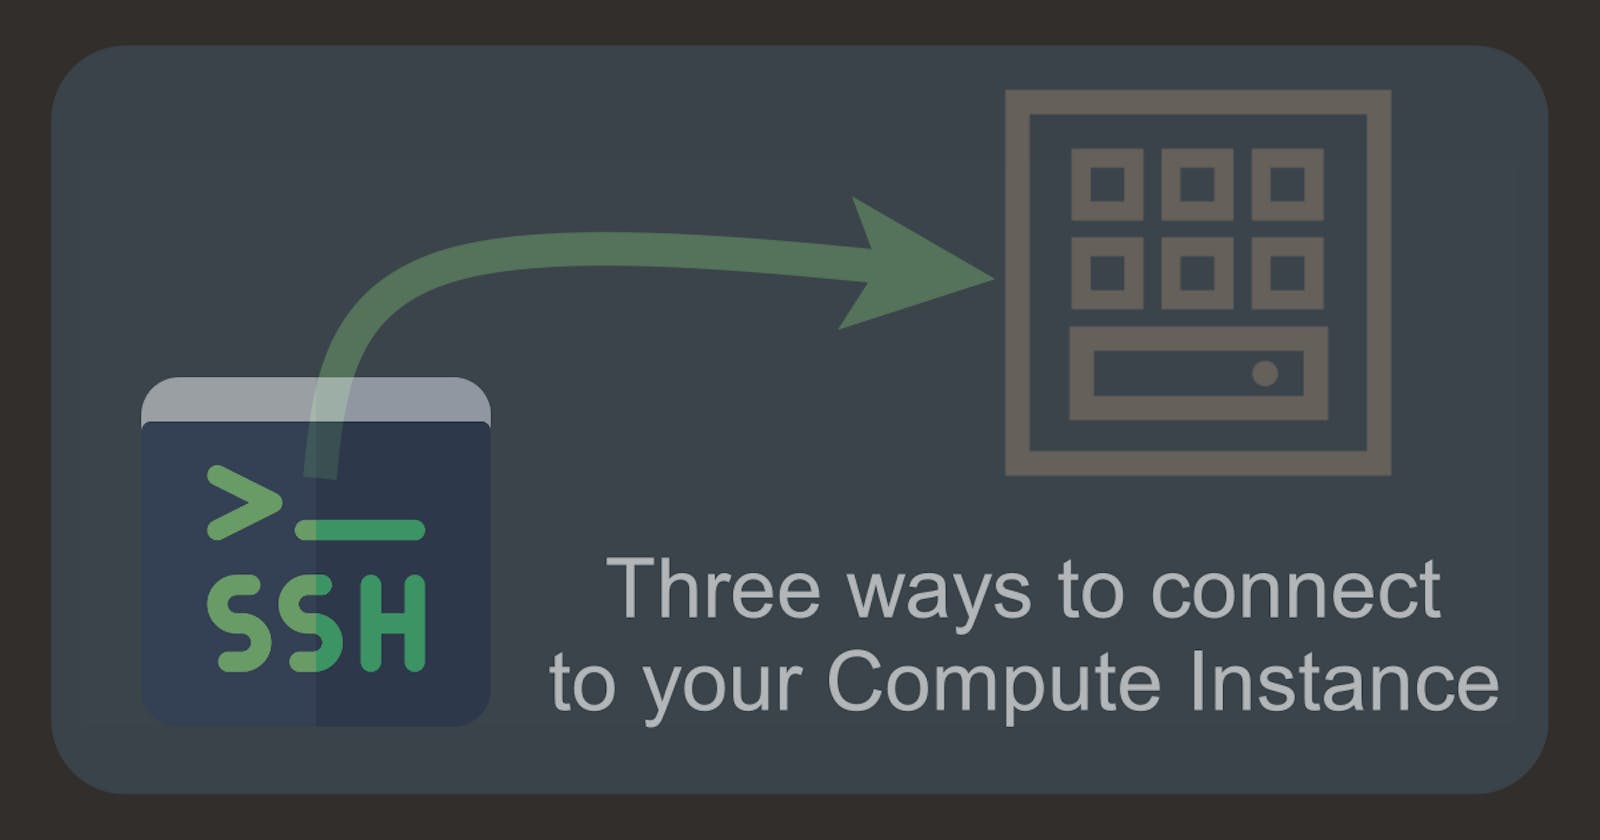 Three ways to connect to your Compute Instance